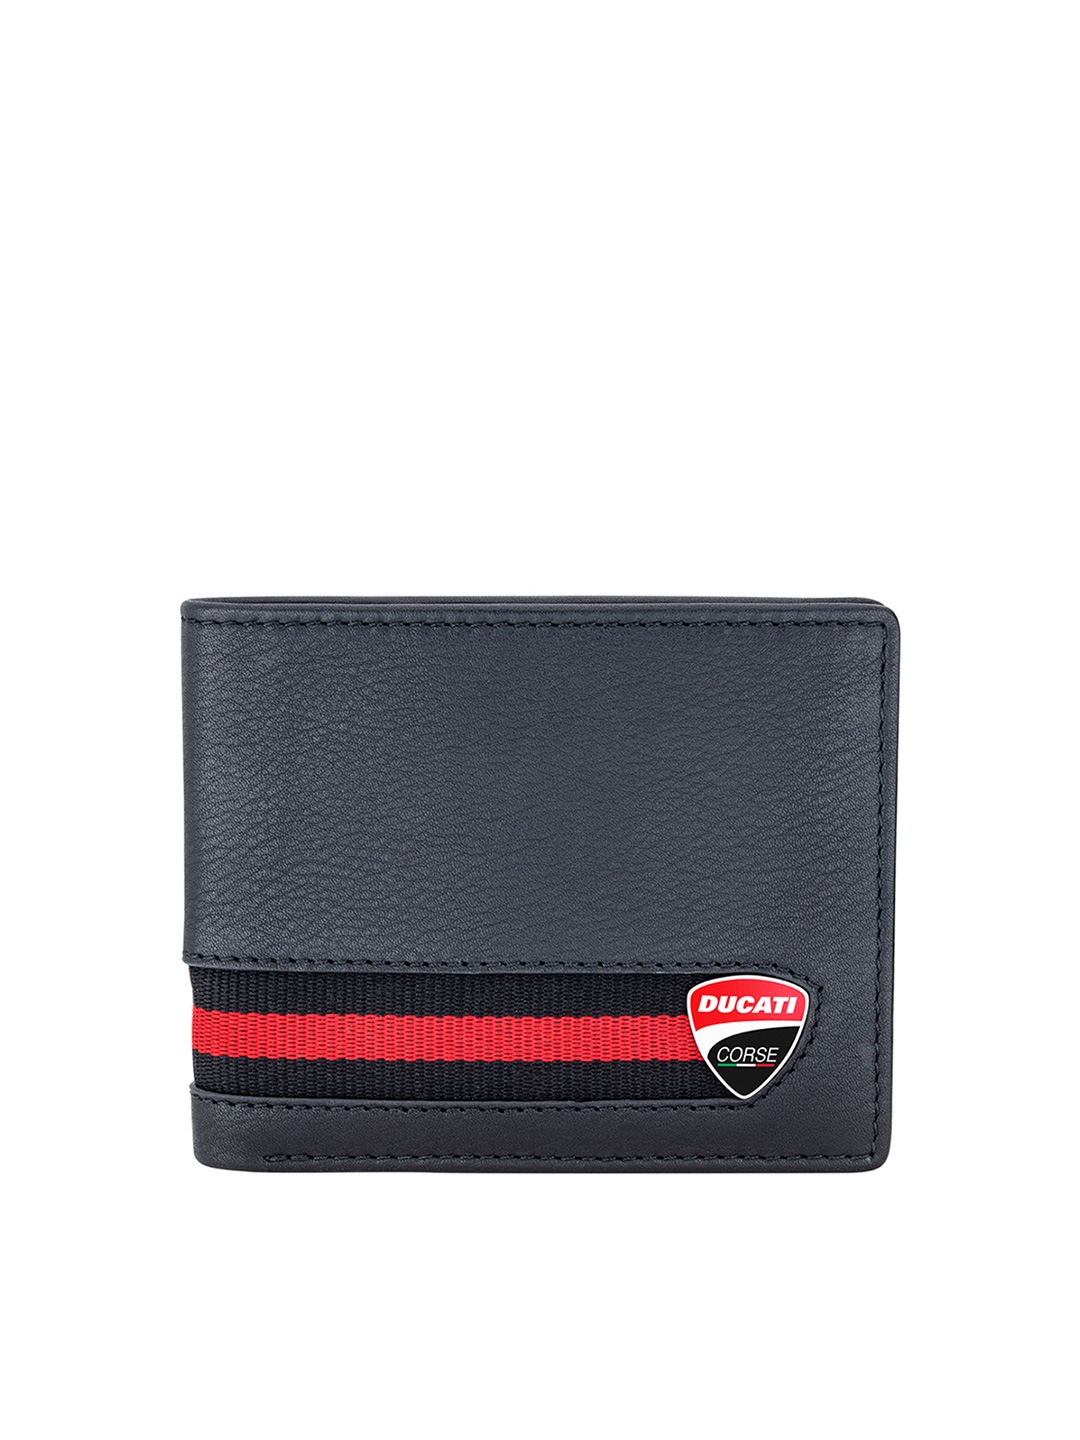 Buy DUCATI CORSE Men Black & Red Leather Two Fold Wallet - Wallets for ...